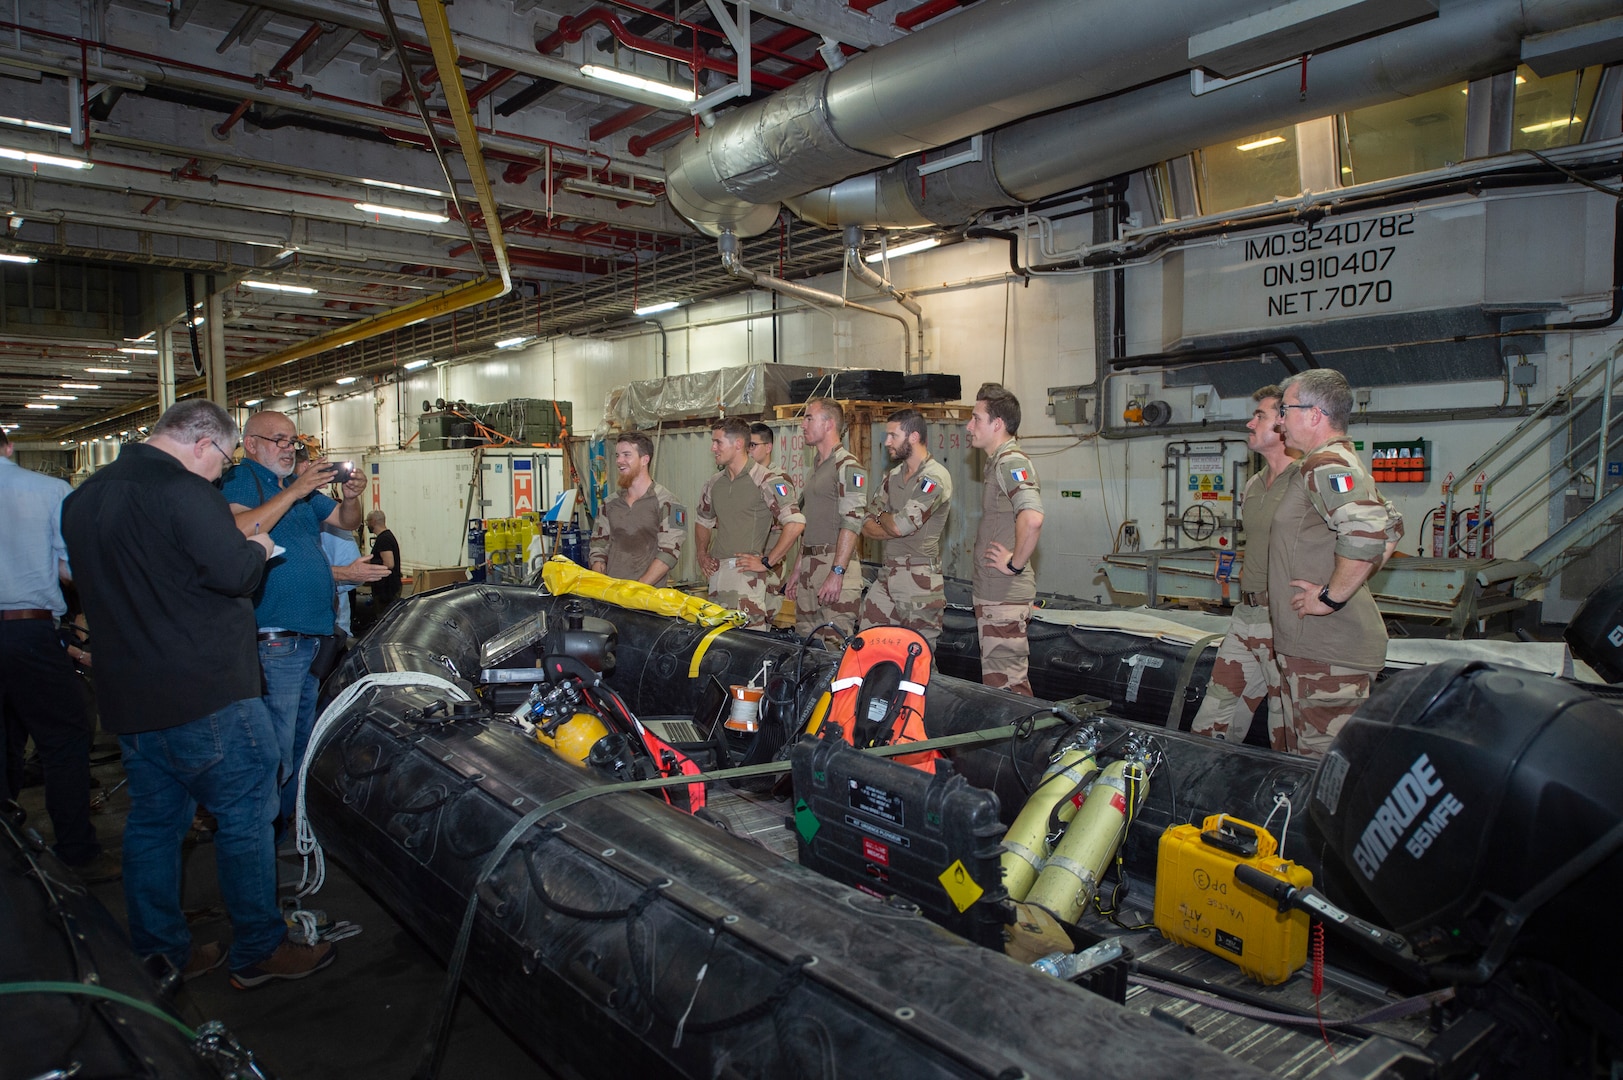 Civilian Journalists discuss divers’ roles in Mine Counter Measures (MCM) during the International Maritime Exercise 2019 (IMX 19), with the French navy divers. The exercise is a multinational engagement involving partners and allies from around the world designed to facilitate the sharing of knowledge and experiences across the full spectrum of defensive maritime operations. IMX 19 serves to demonstrate the global resolve in maintaining regional security and stability, freedom of navigation and the free flow of commerce from the Suez Canal south to the Bab el-Mandeb Strait through the Strait of Hormuz to the Northern Arabian Gulf. (U.S. Navy photo by Mass Communication Specialist 3rd Class Darienne Slack